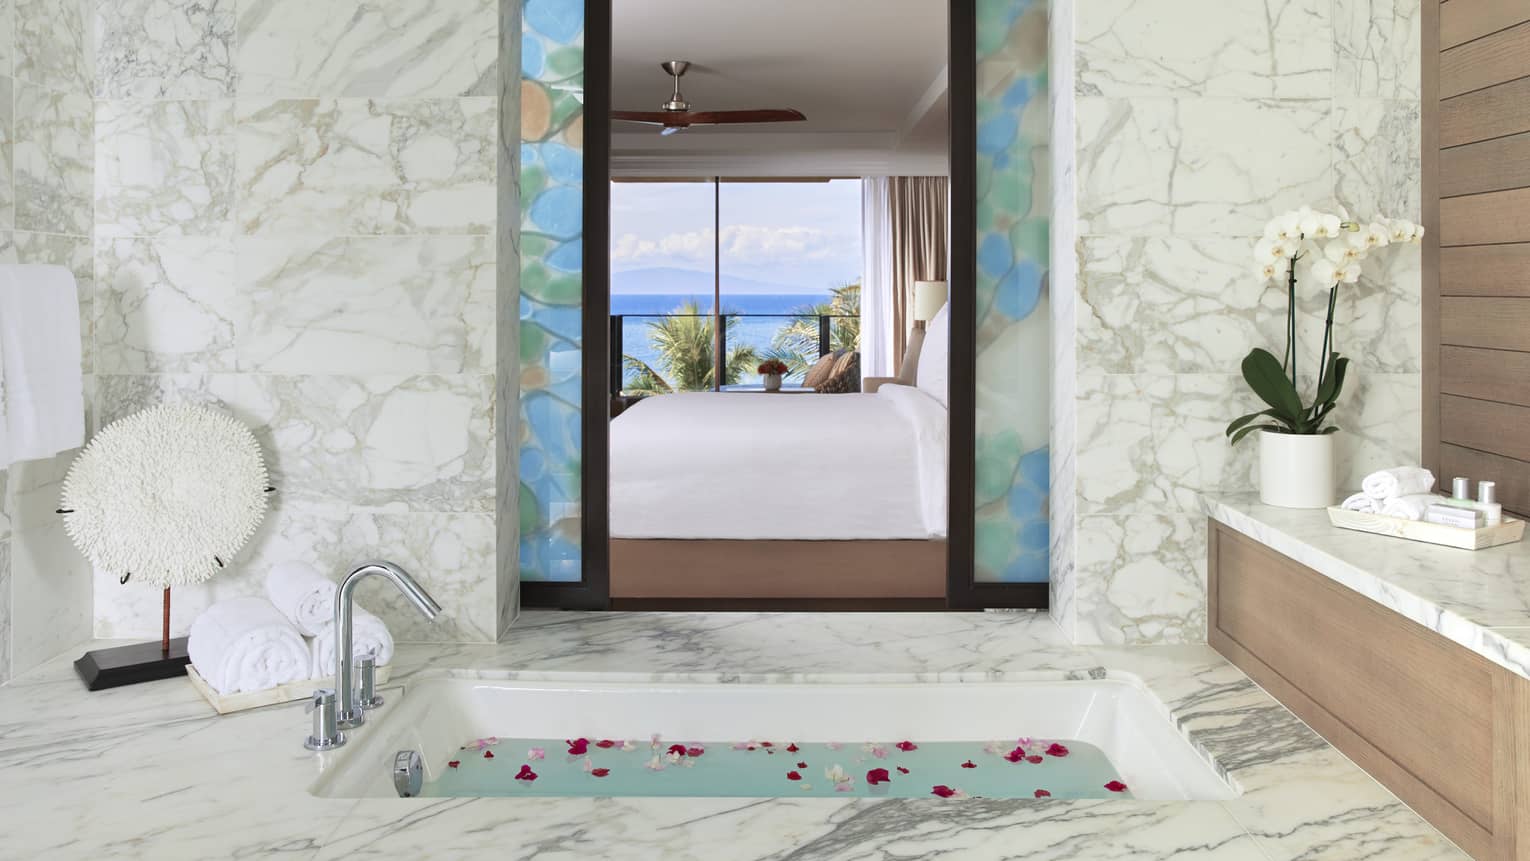 White marble bathroom with water- and rose petal–filled soaking tub and view through bedroom